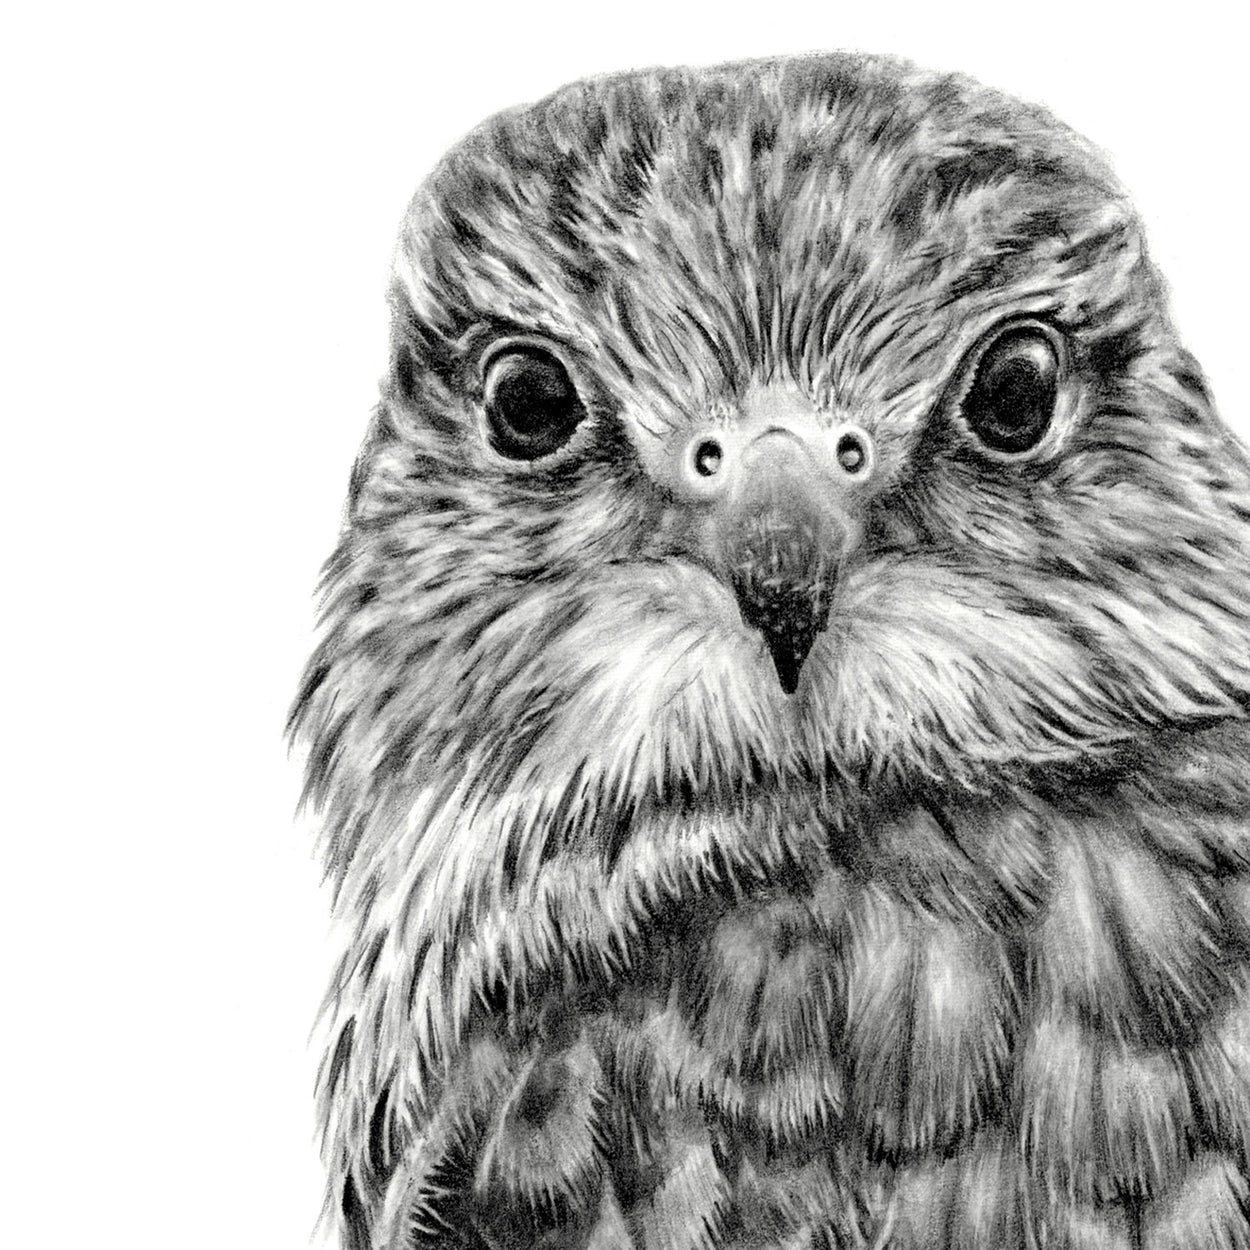 Merlin Bird Drawing Close-up 1 - The Thriving Wild